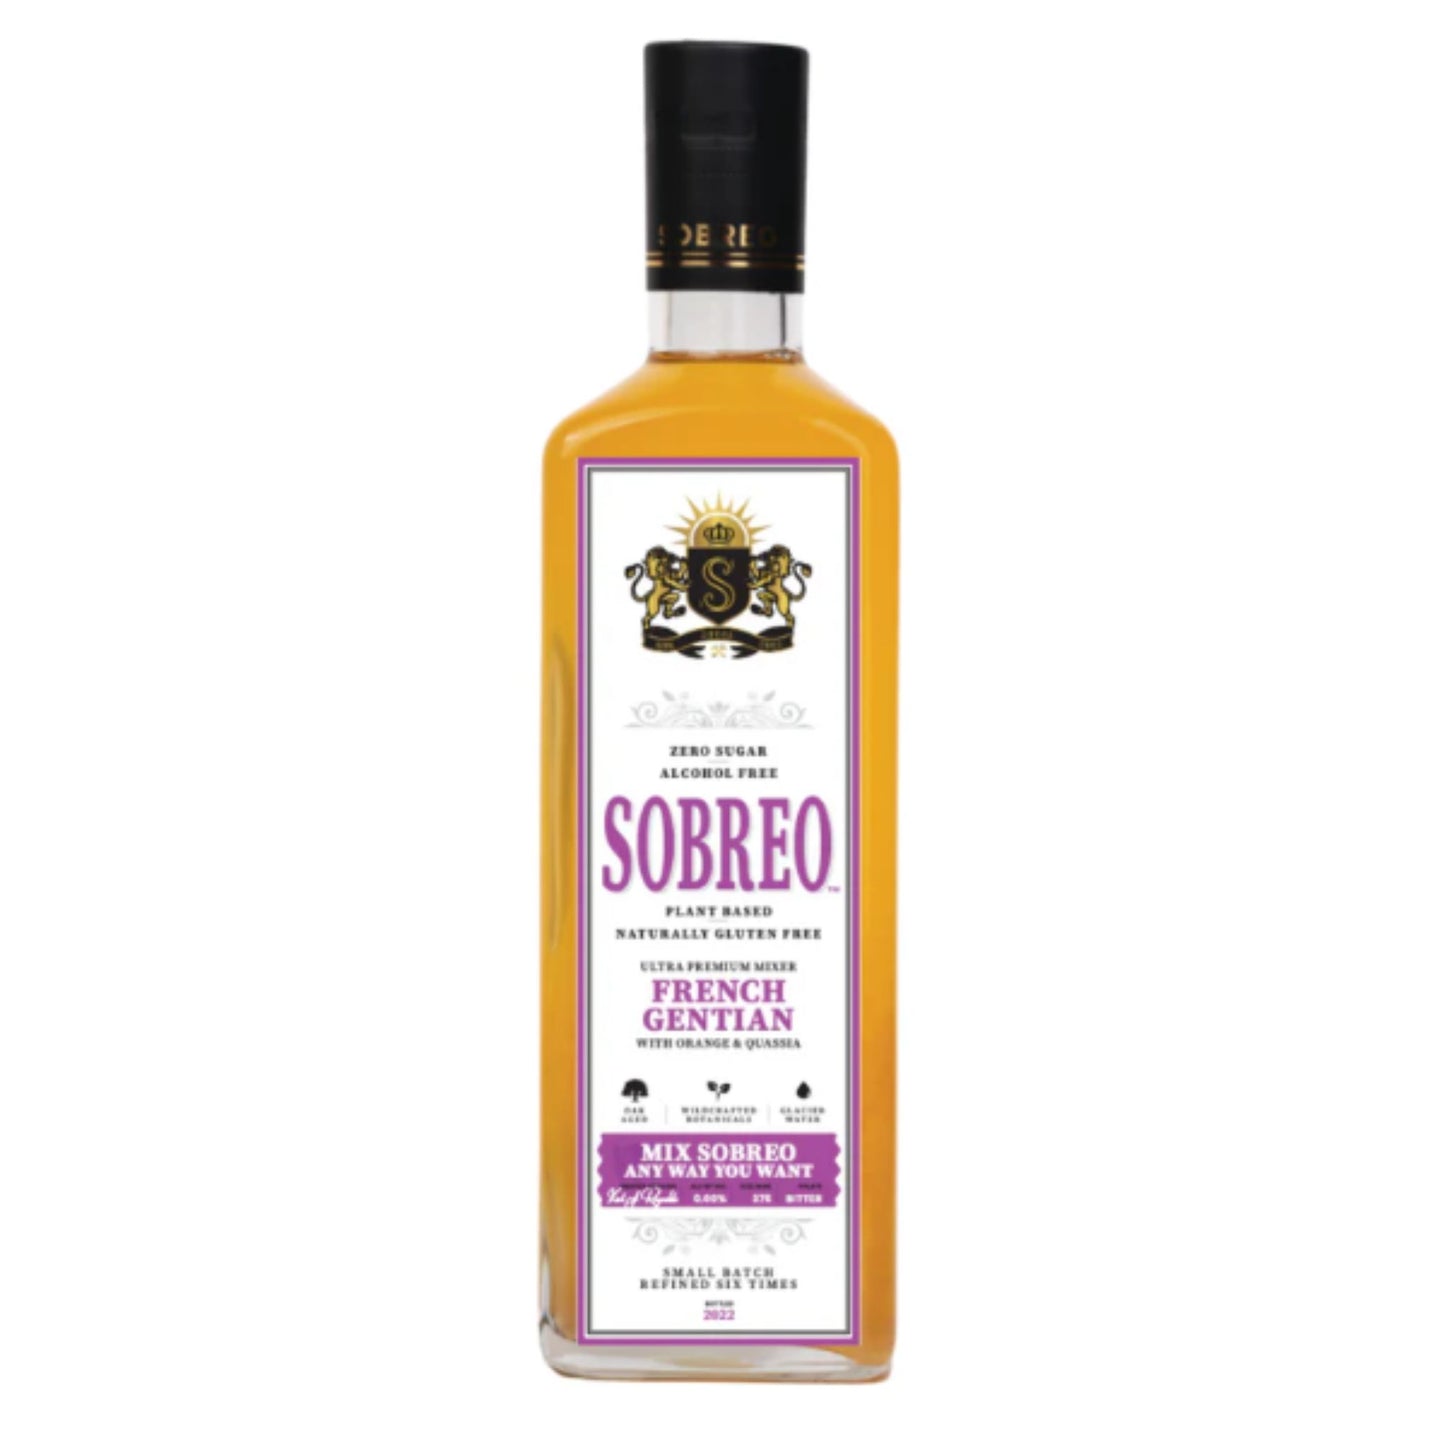 Sobreo French Gentian non-alcoholic mixer is available for sale at Knyota Drinks in Ottawa.